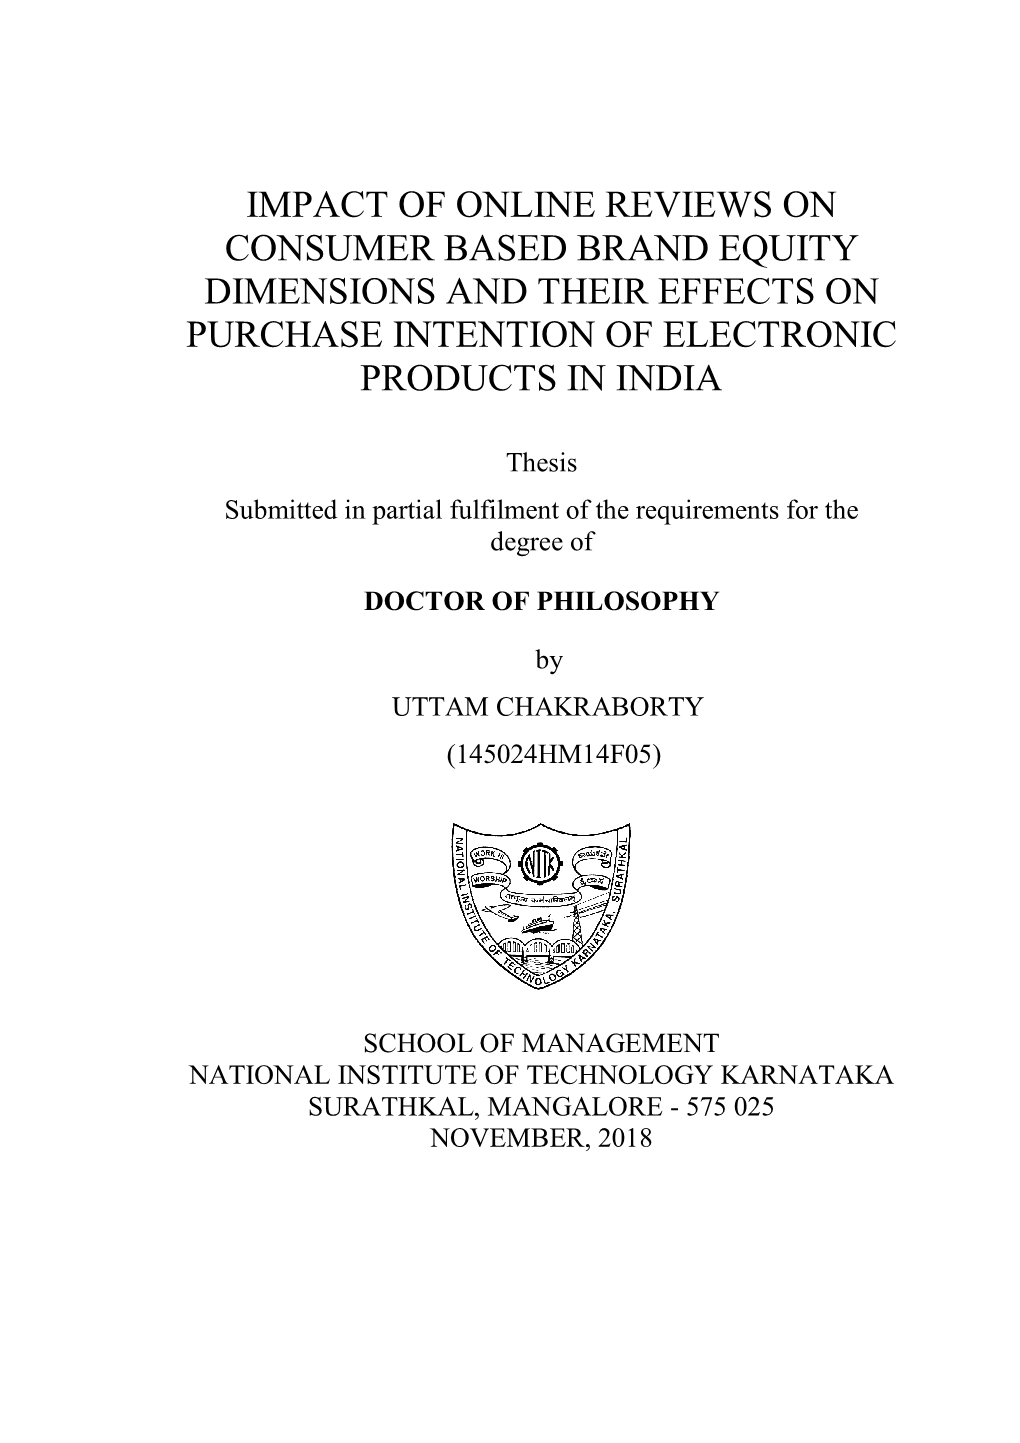 Impact of Online Reviews on Consumer Based Brand Equity Dimensions and Their Effects on Purchase Intention of Electronic Products in India